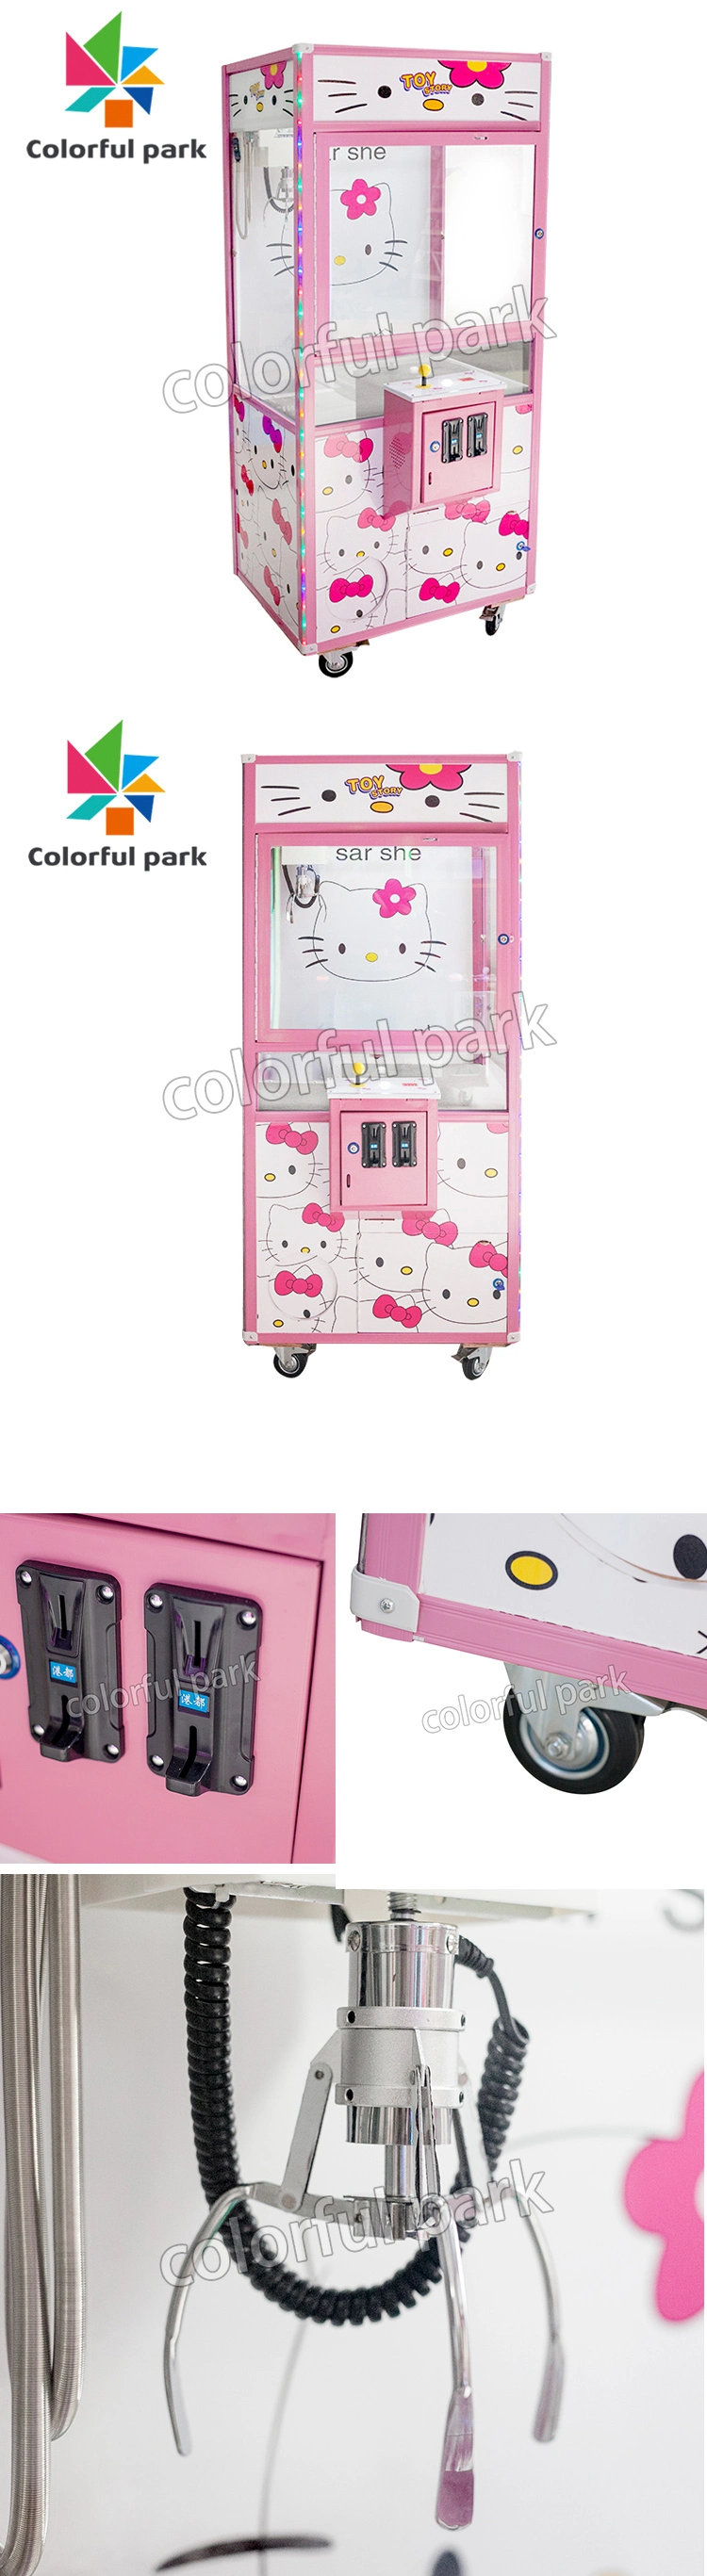 Colorful Park Hello Kitty Crane Gift Coin Operated Arcade Amusement Toy Prize Claw Game Machine